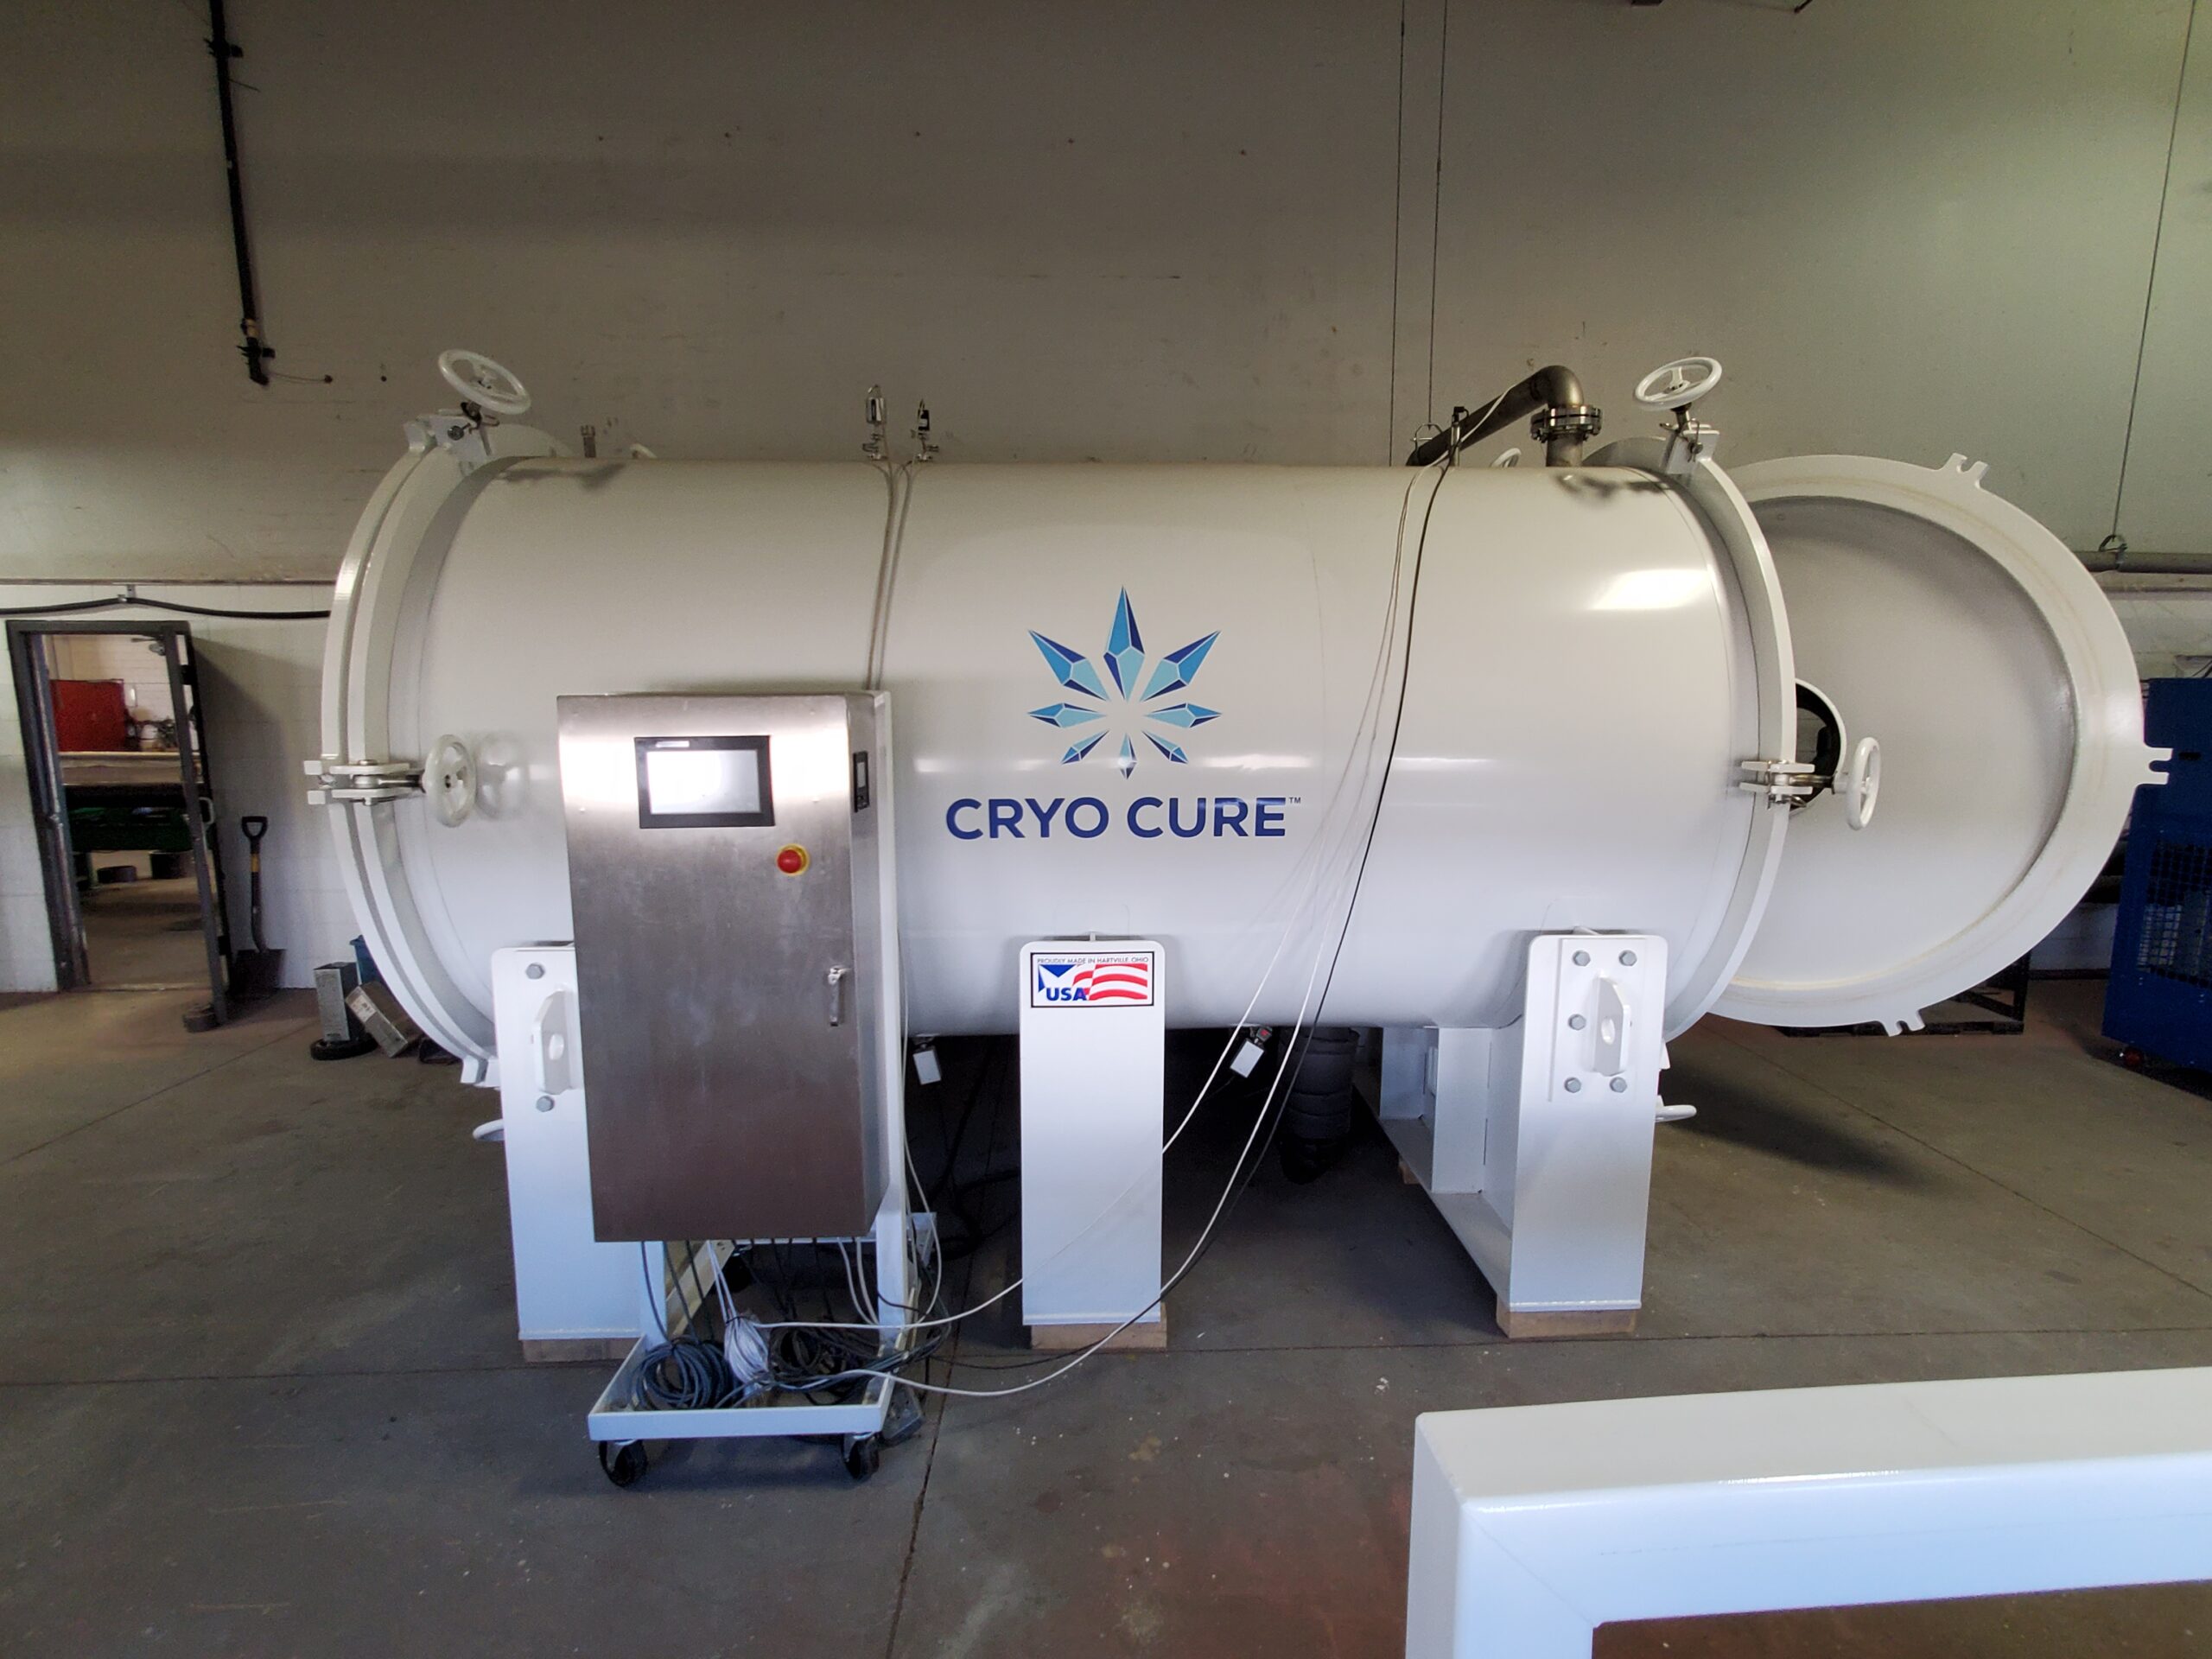 Cryo Cure vinyl decal graphic akron